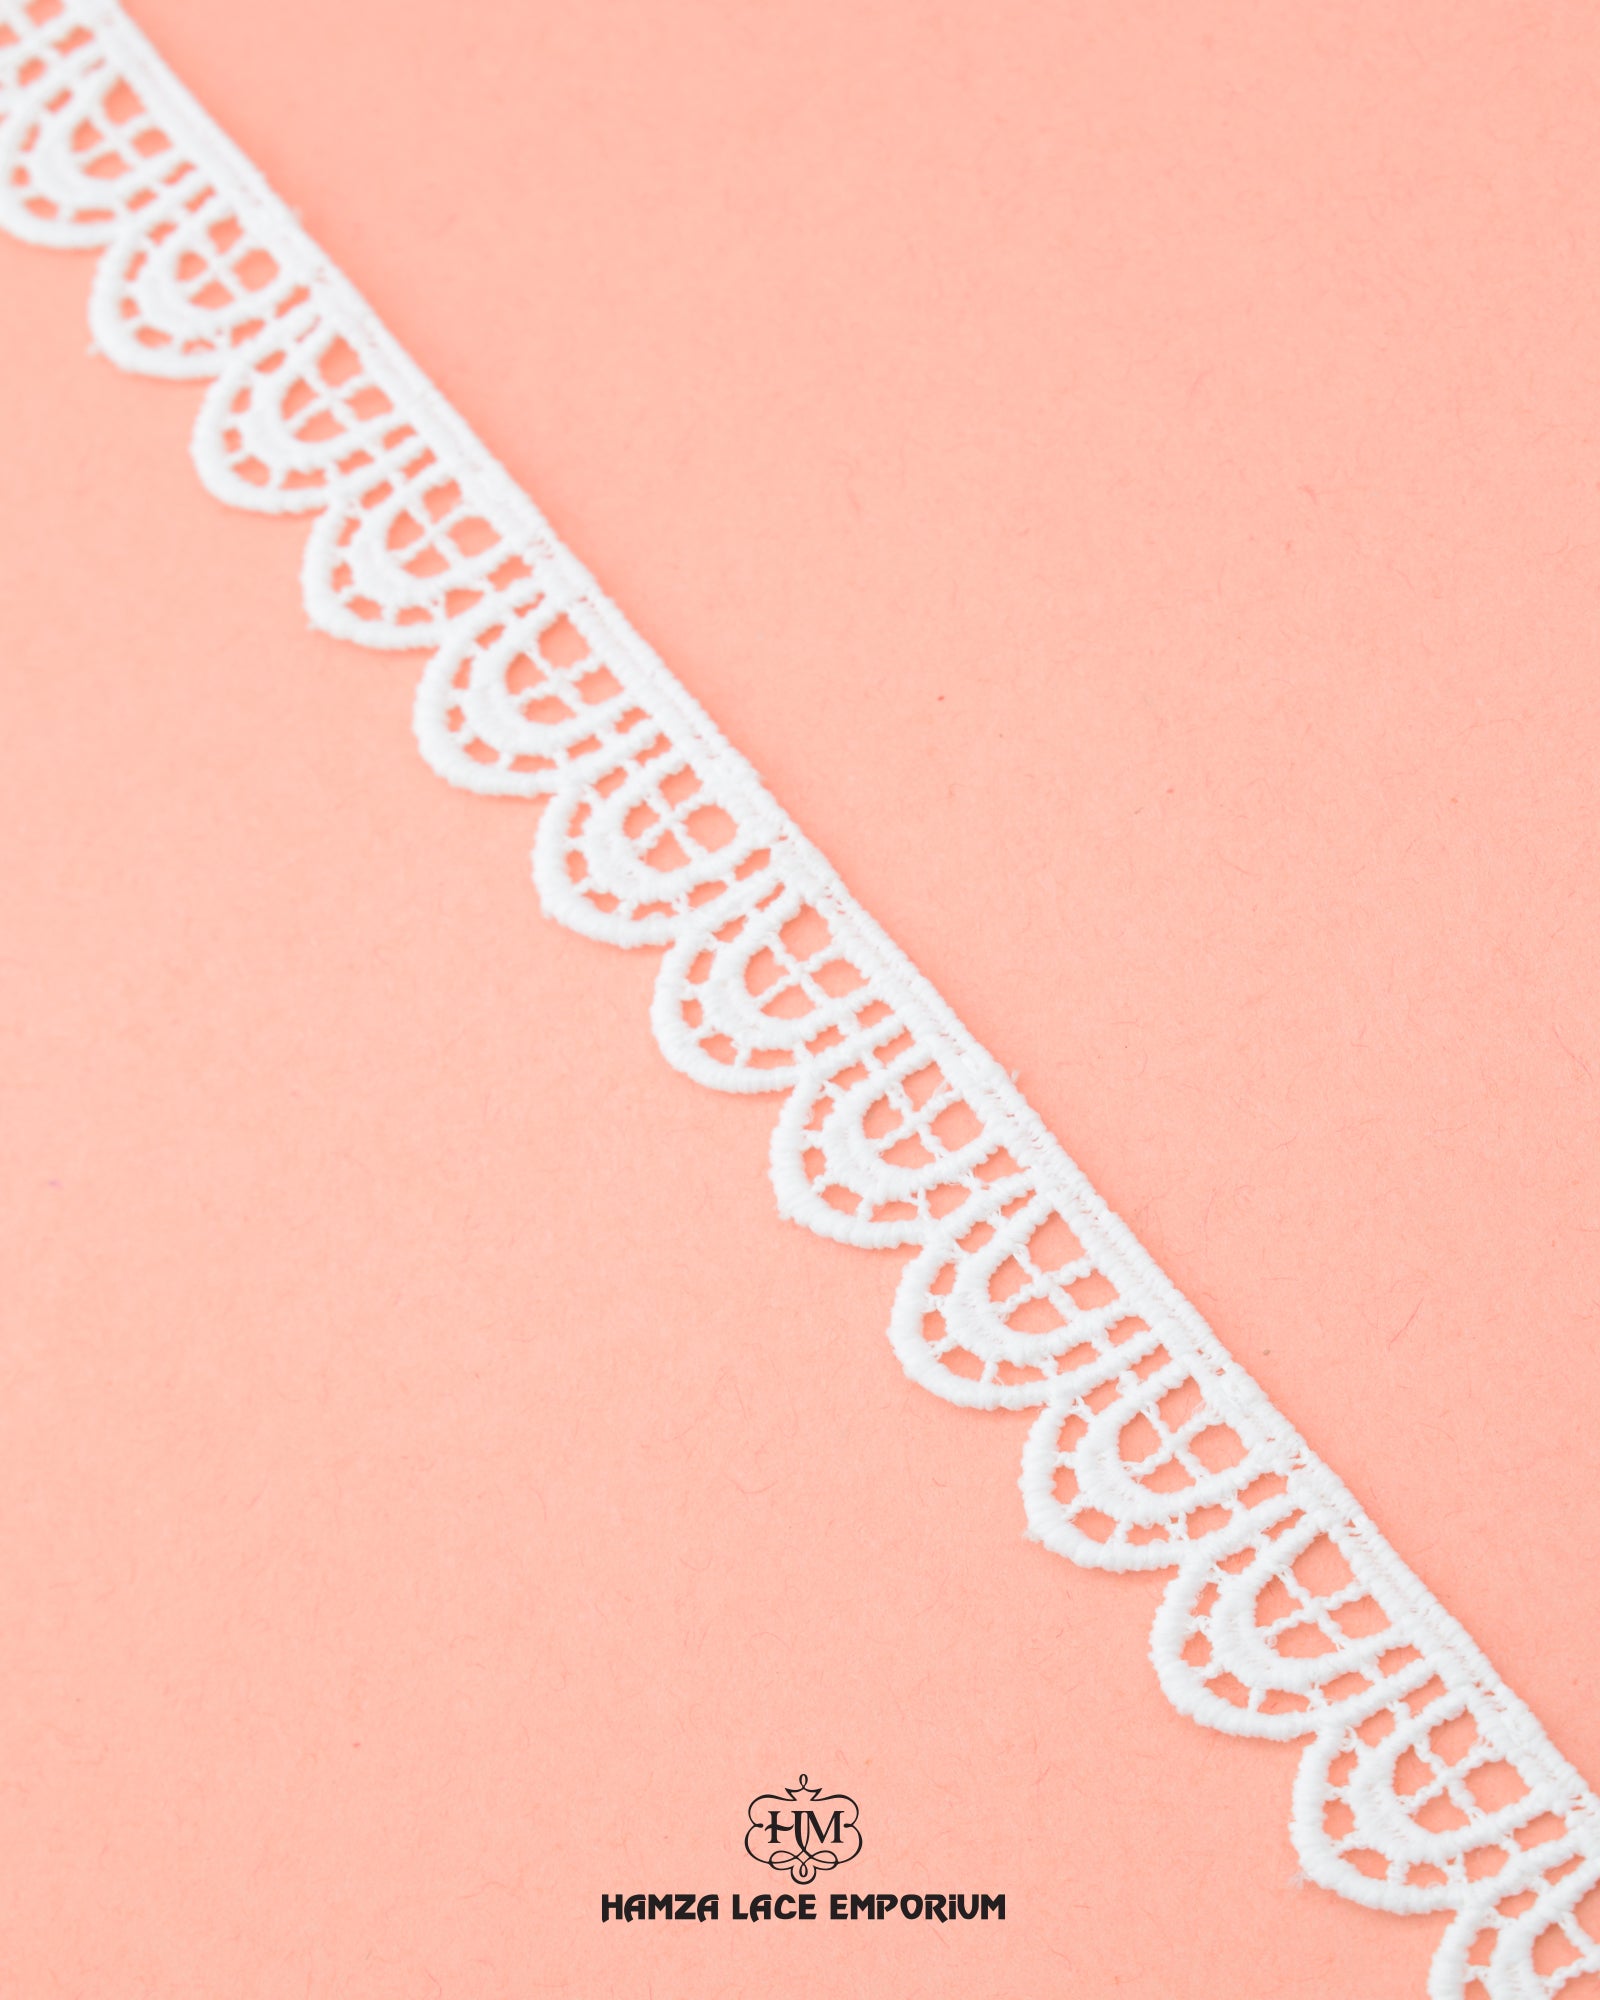 'Edging Lace 494' with the 'Hamza Lace' sign